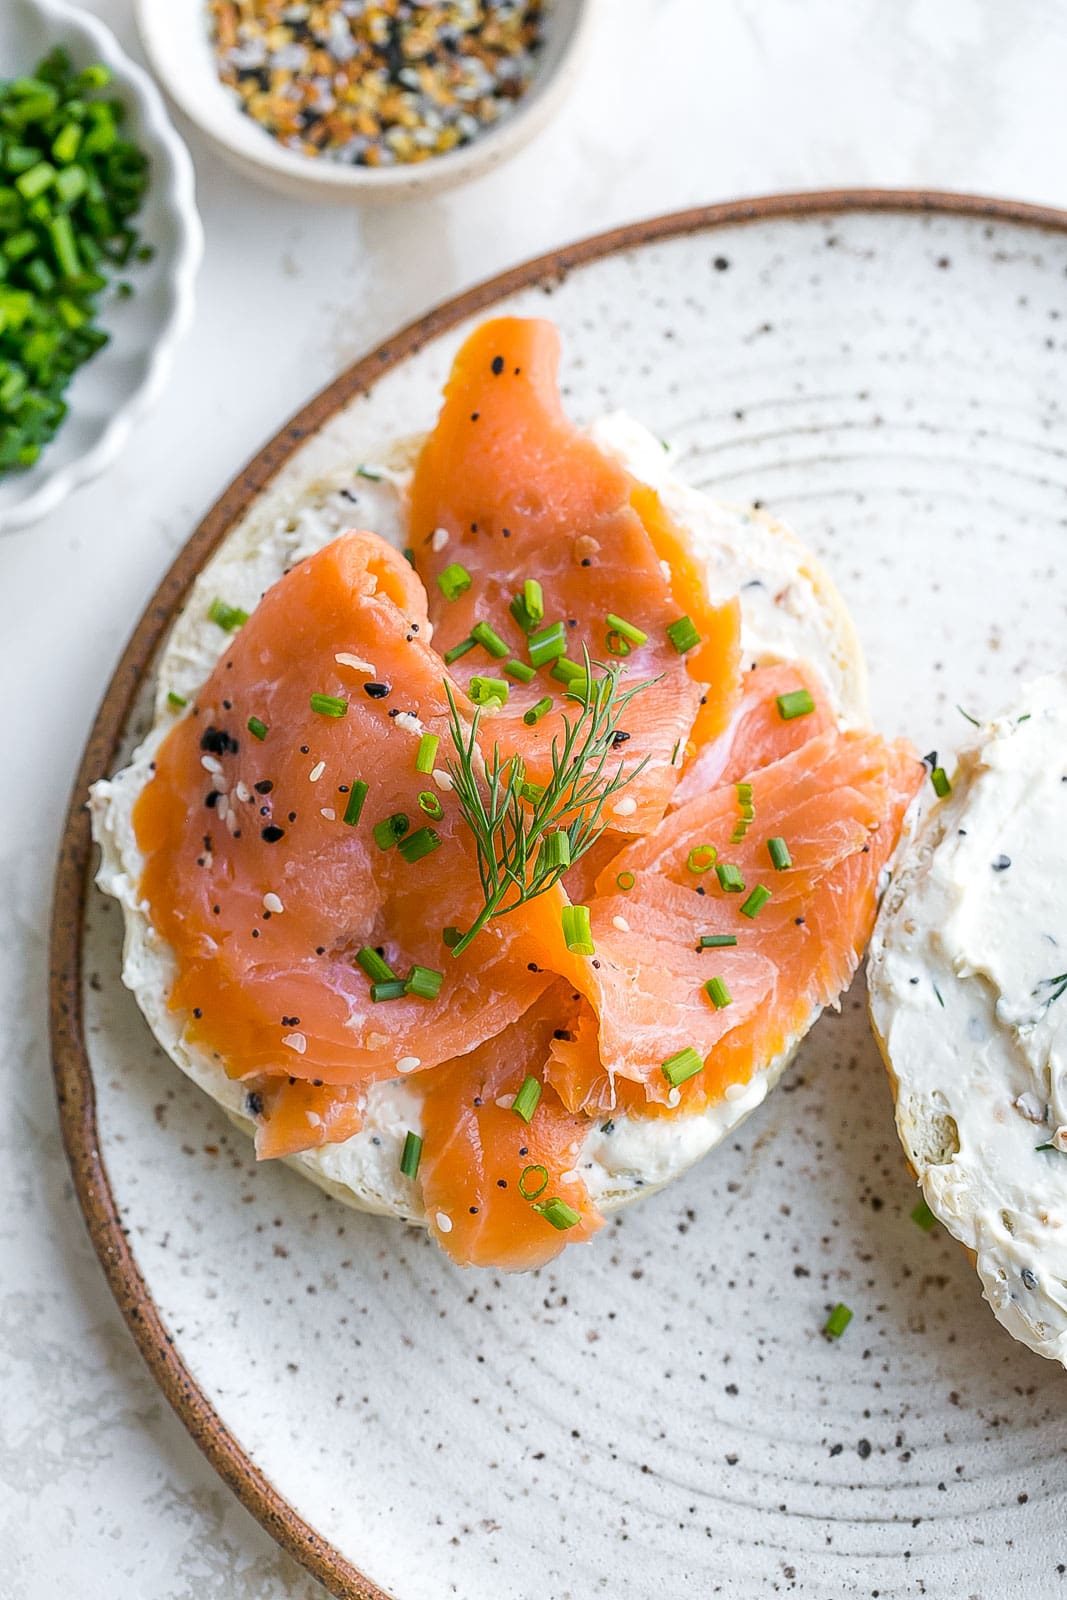 Smoked salmon on a bagel.